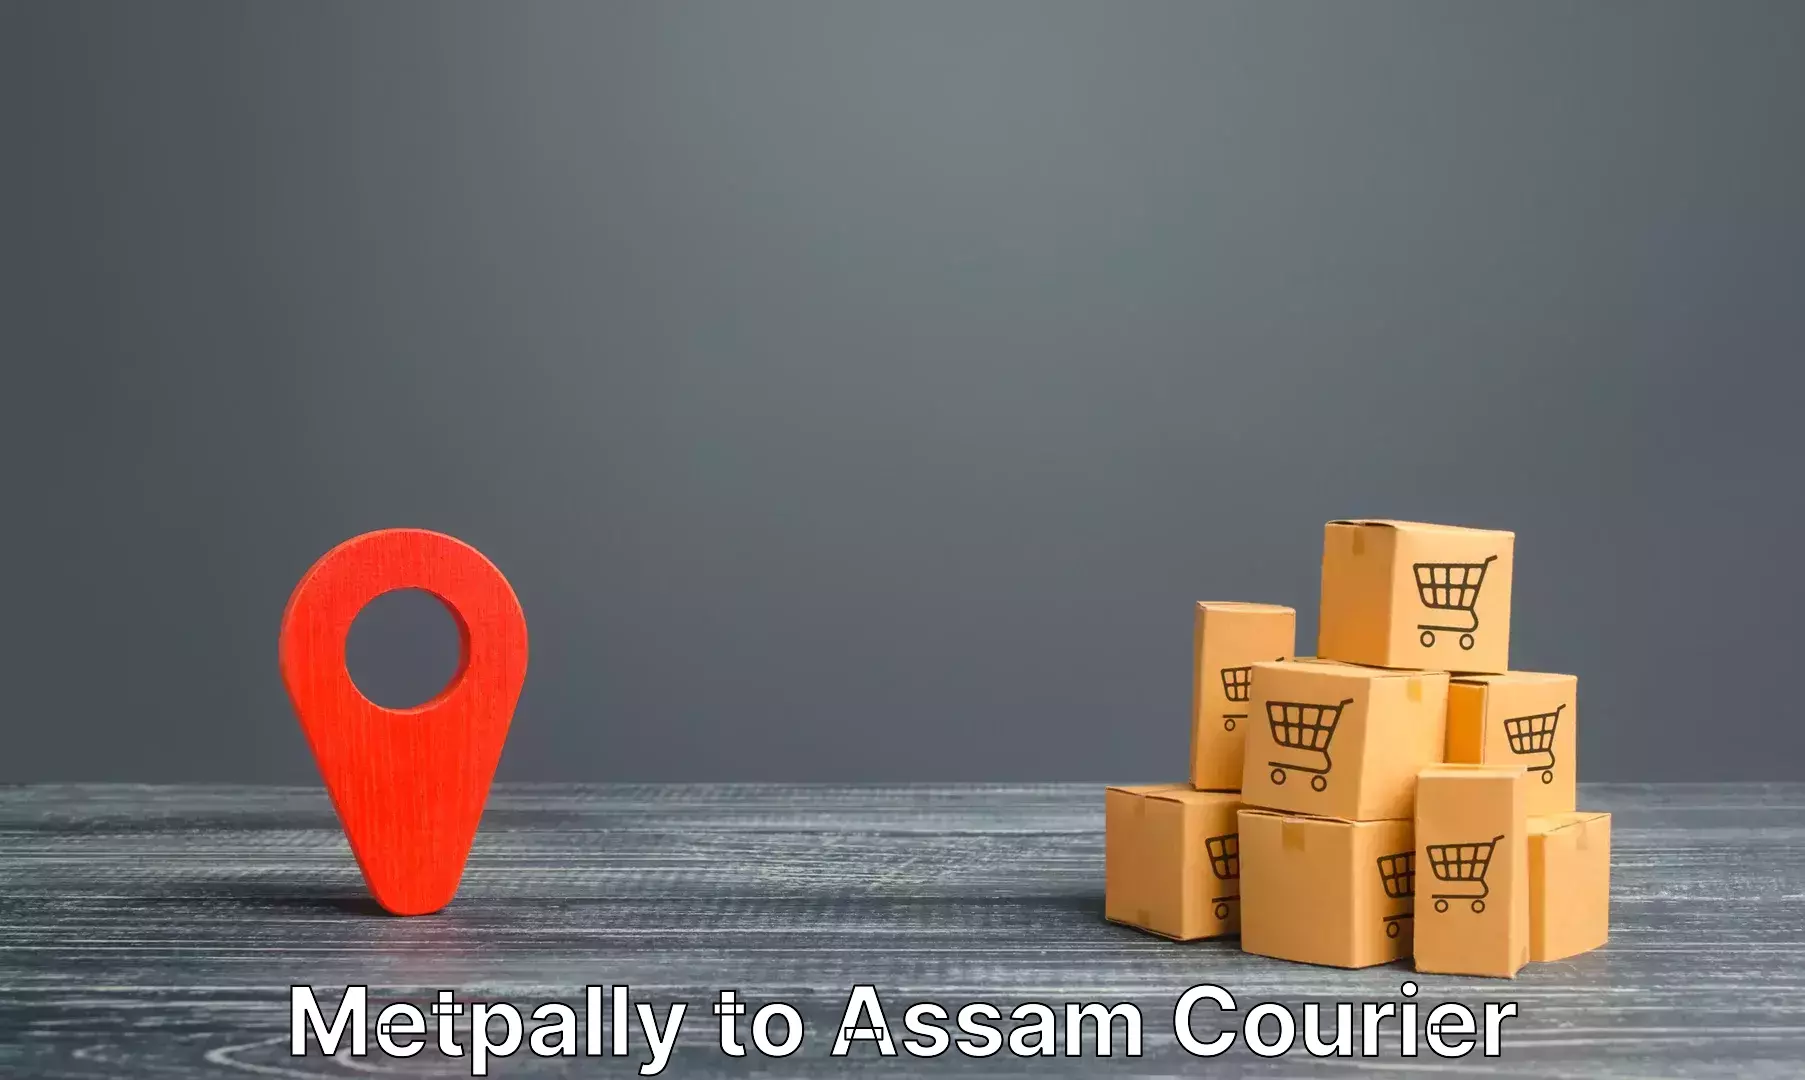 Instant baggage transport quote Metpally to Guwahati University